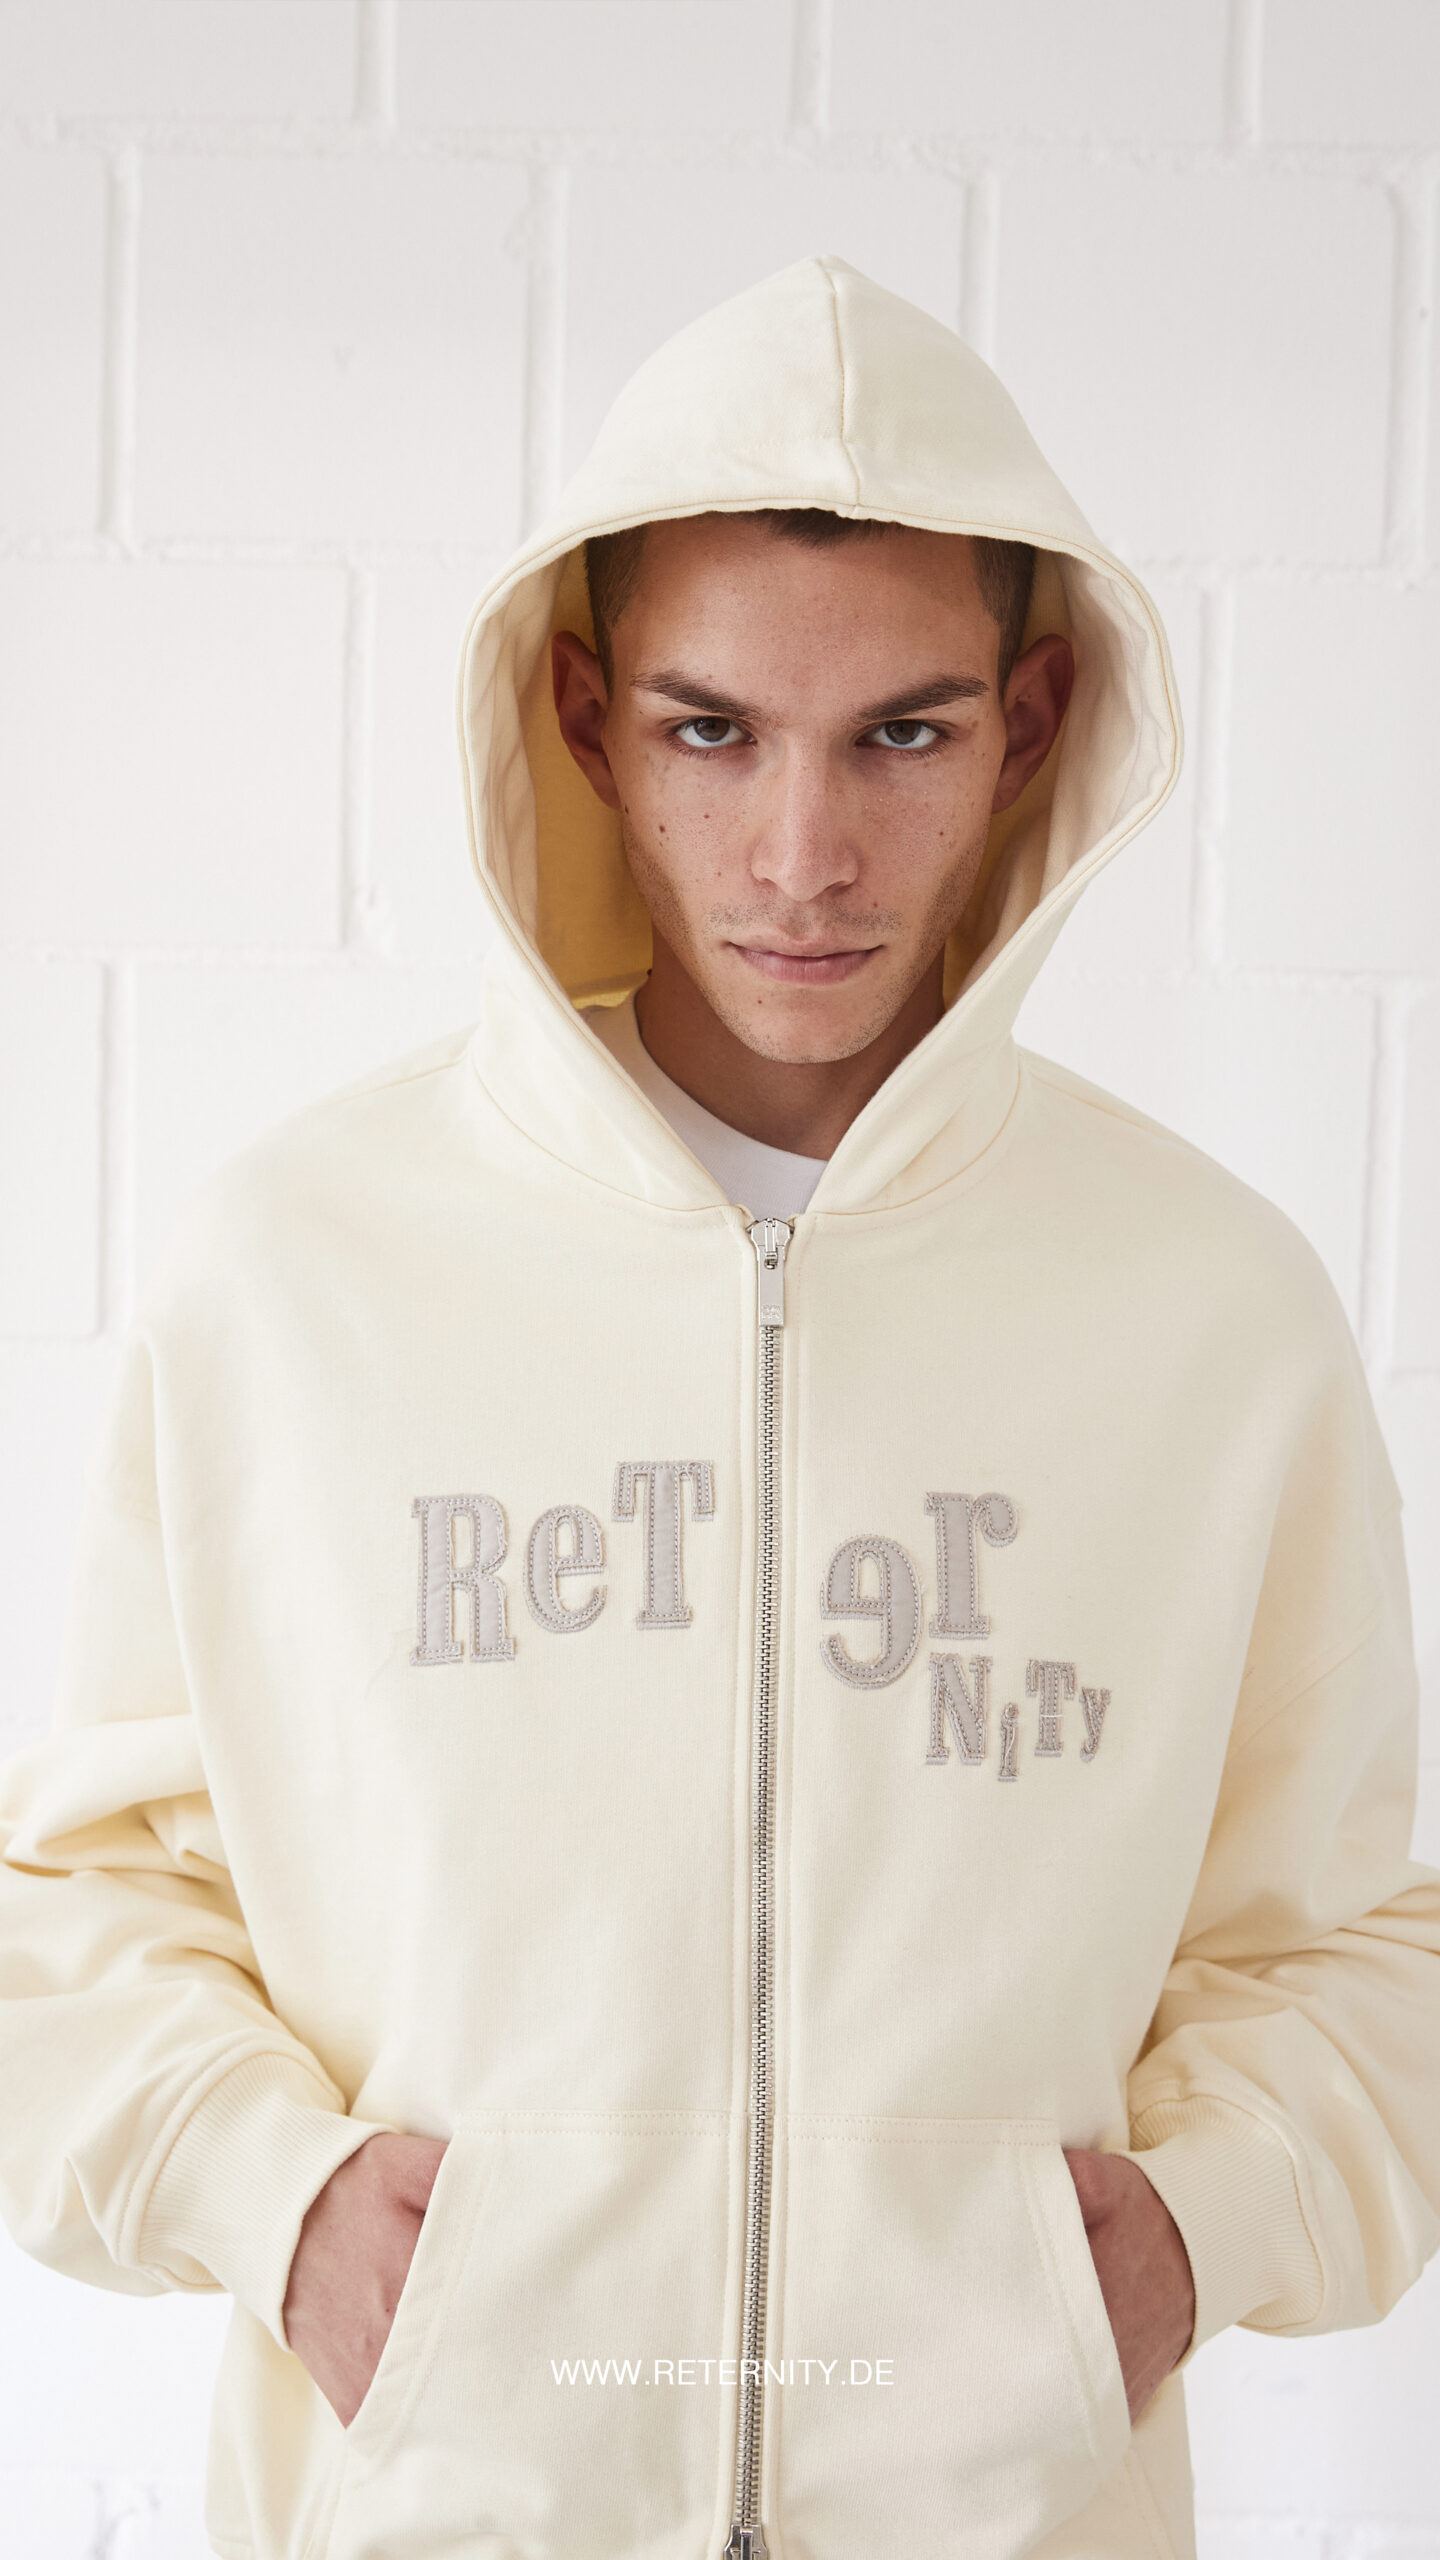 RETERNITY To Release the ‘TELL ME HOW’ Collection